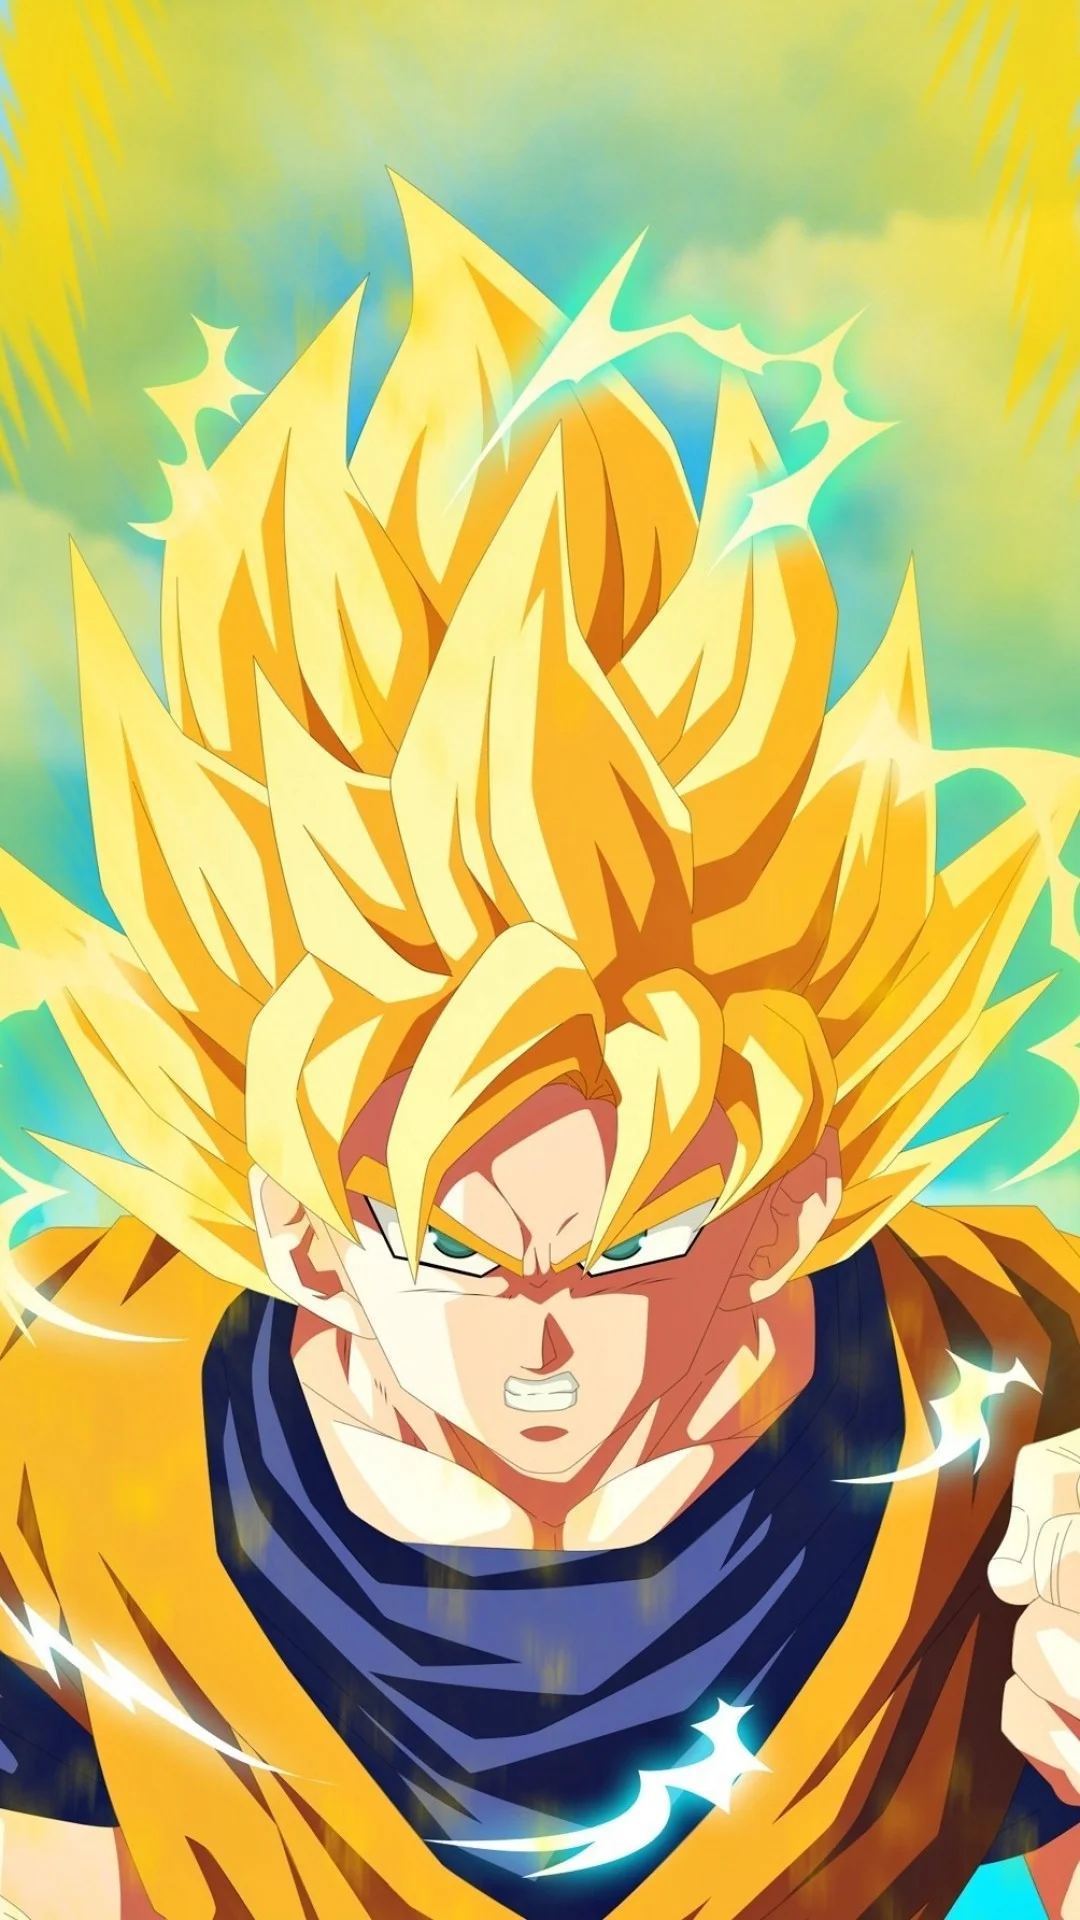 100+] Dragon Ball Z Iphone Wallpapers | Wallpapers.com